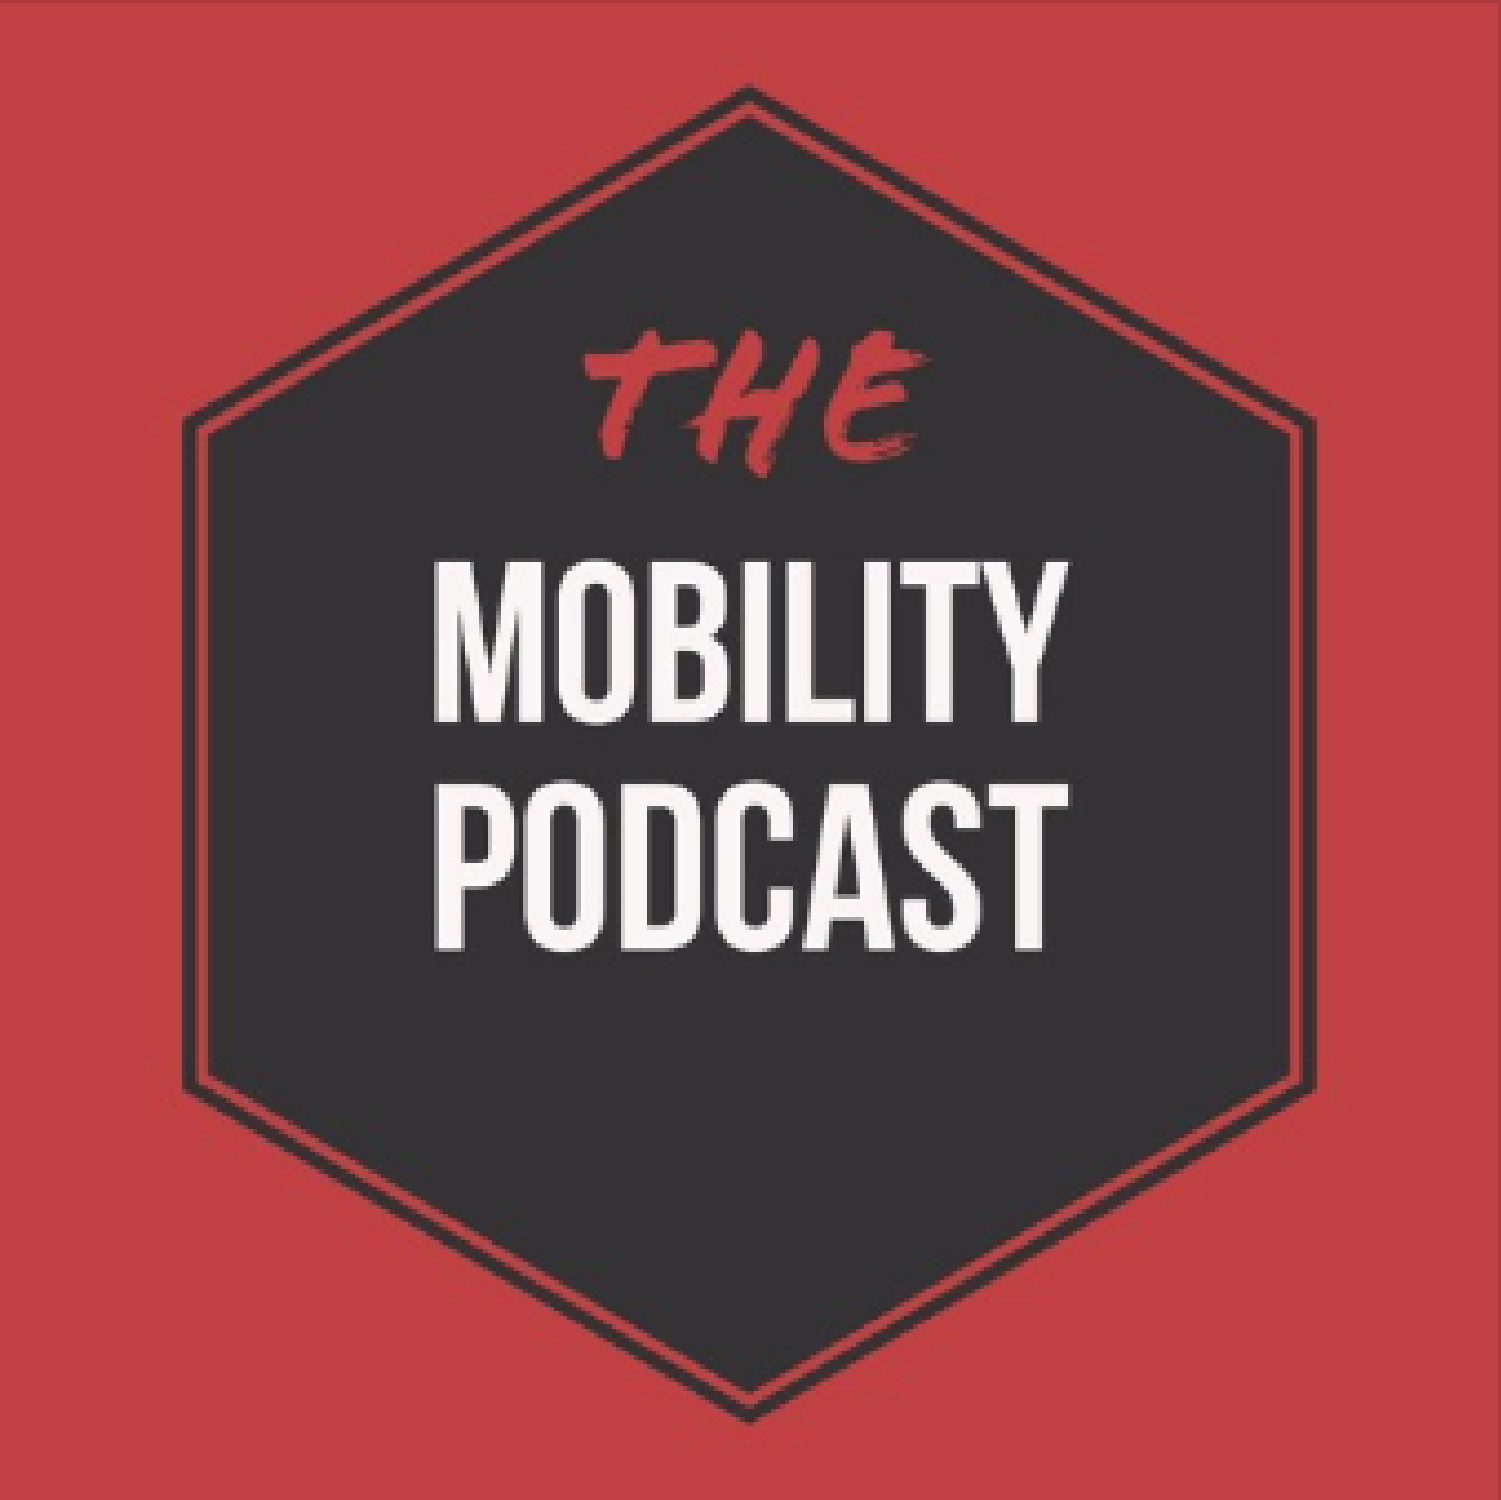 Mobility Podcast